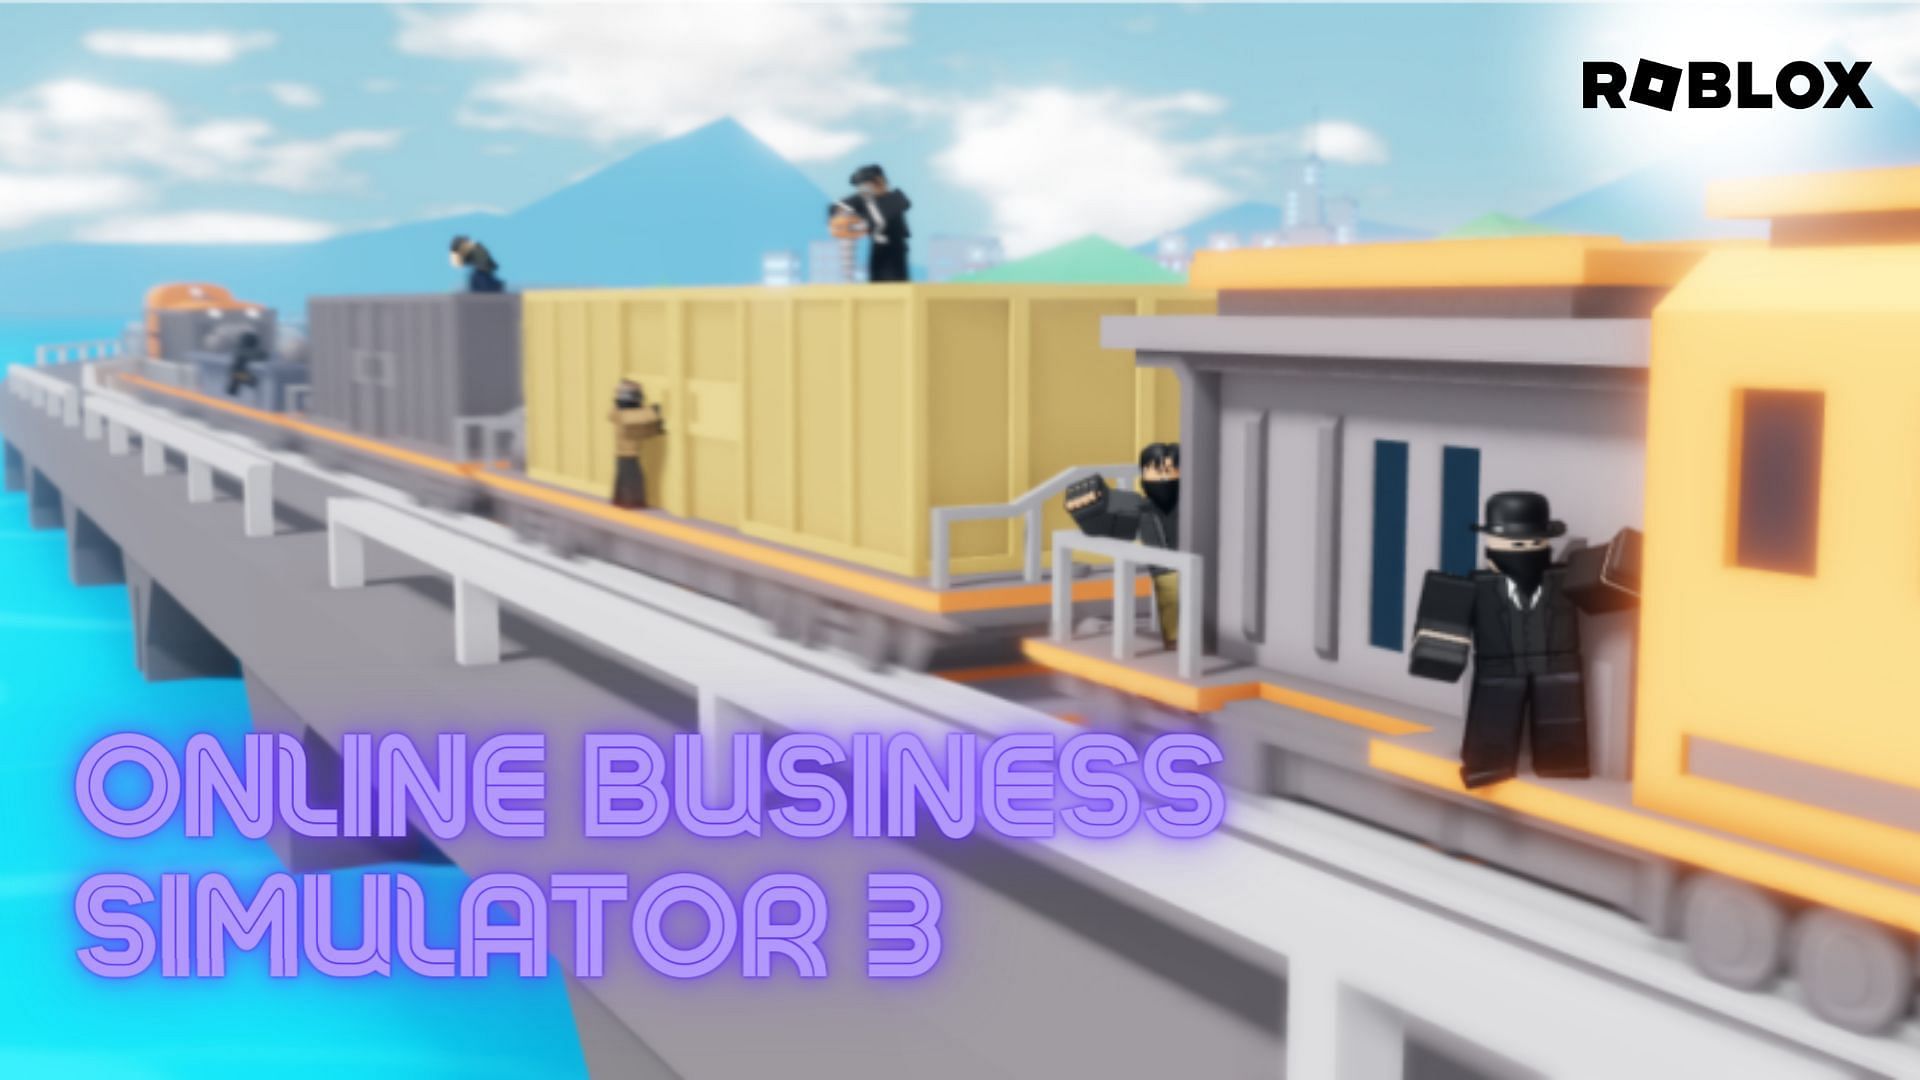 Online Business Simulator 3 codes – are there any?